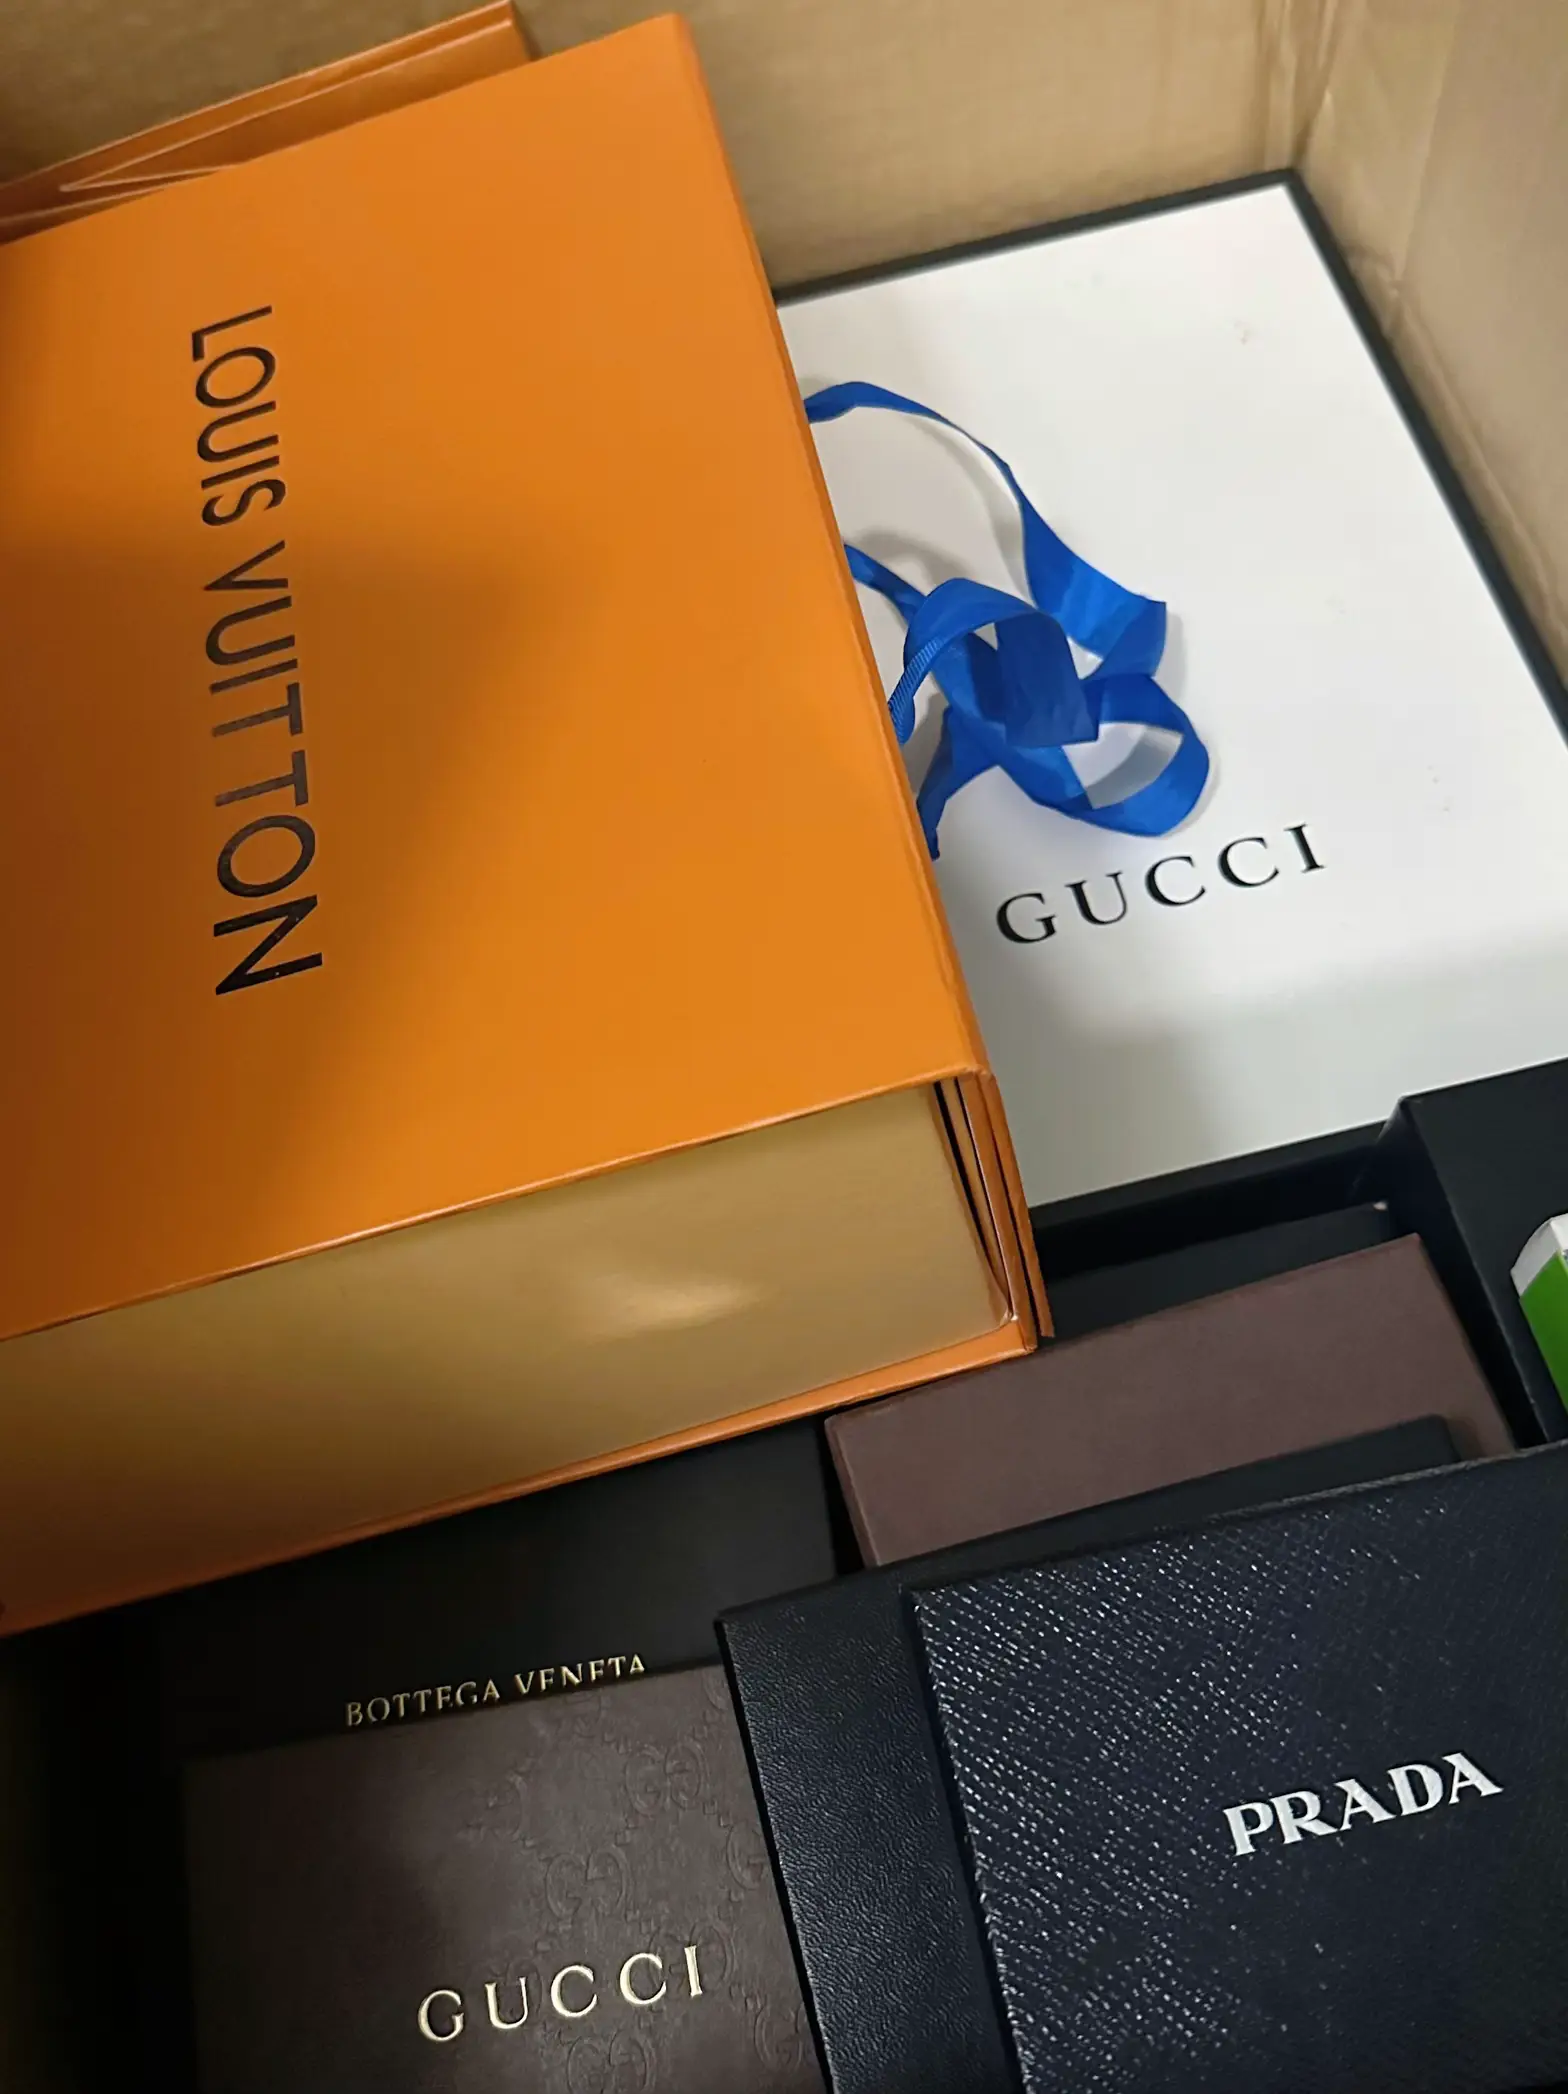 Orange and Lemon Pouches need to chill real quick, gonna make me act up. :  r/Louisvuitton